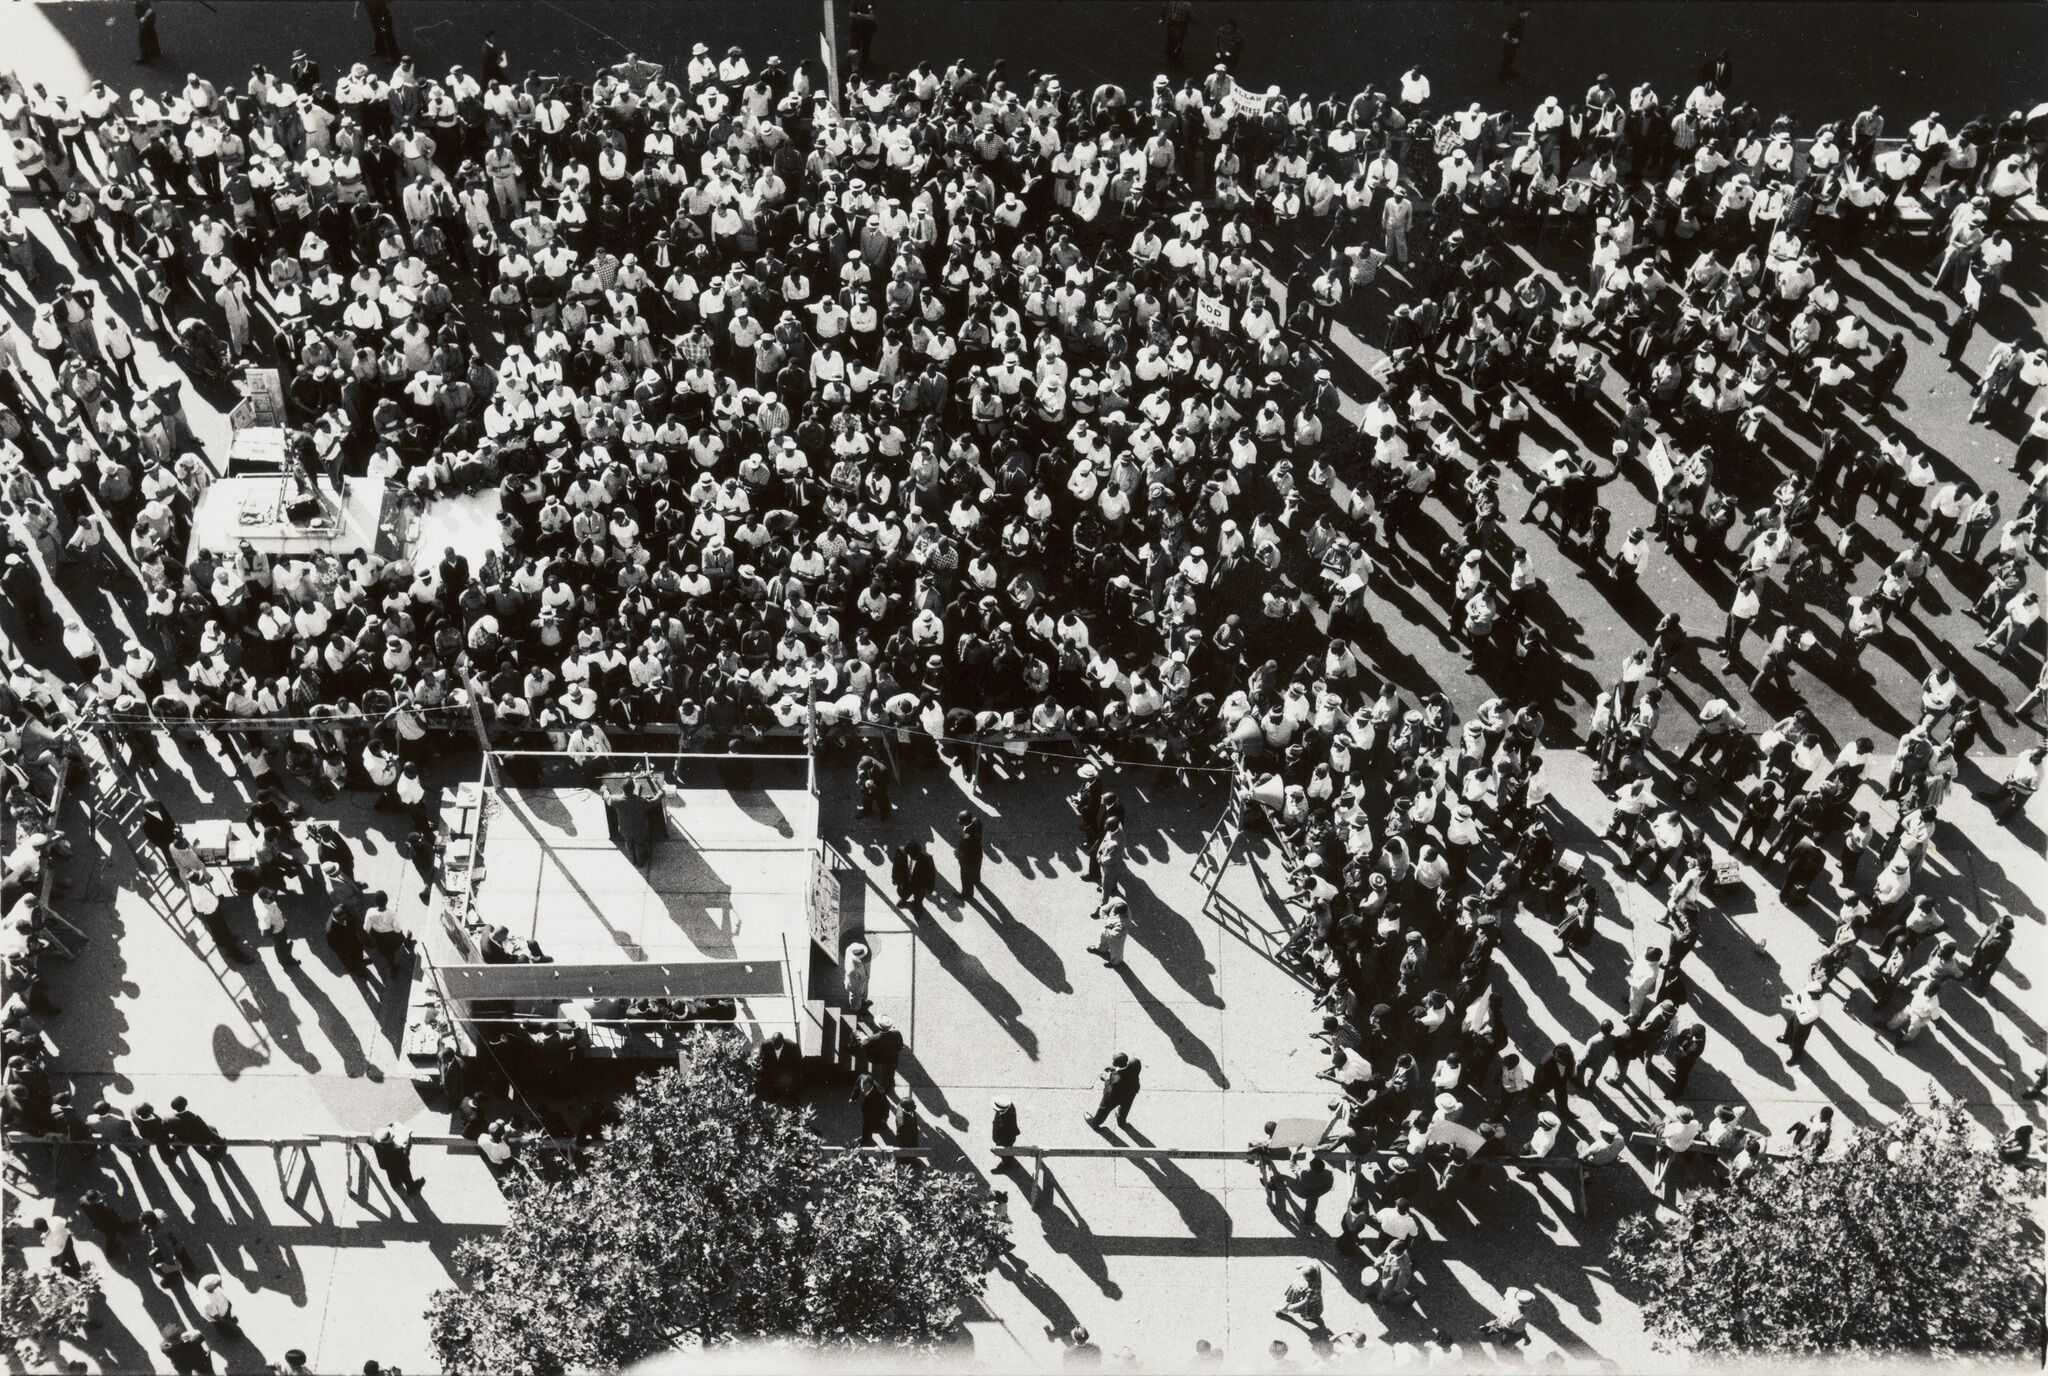 An aerial view of a crowd around a small stage.